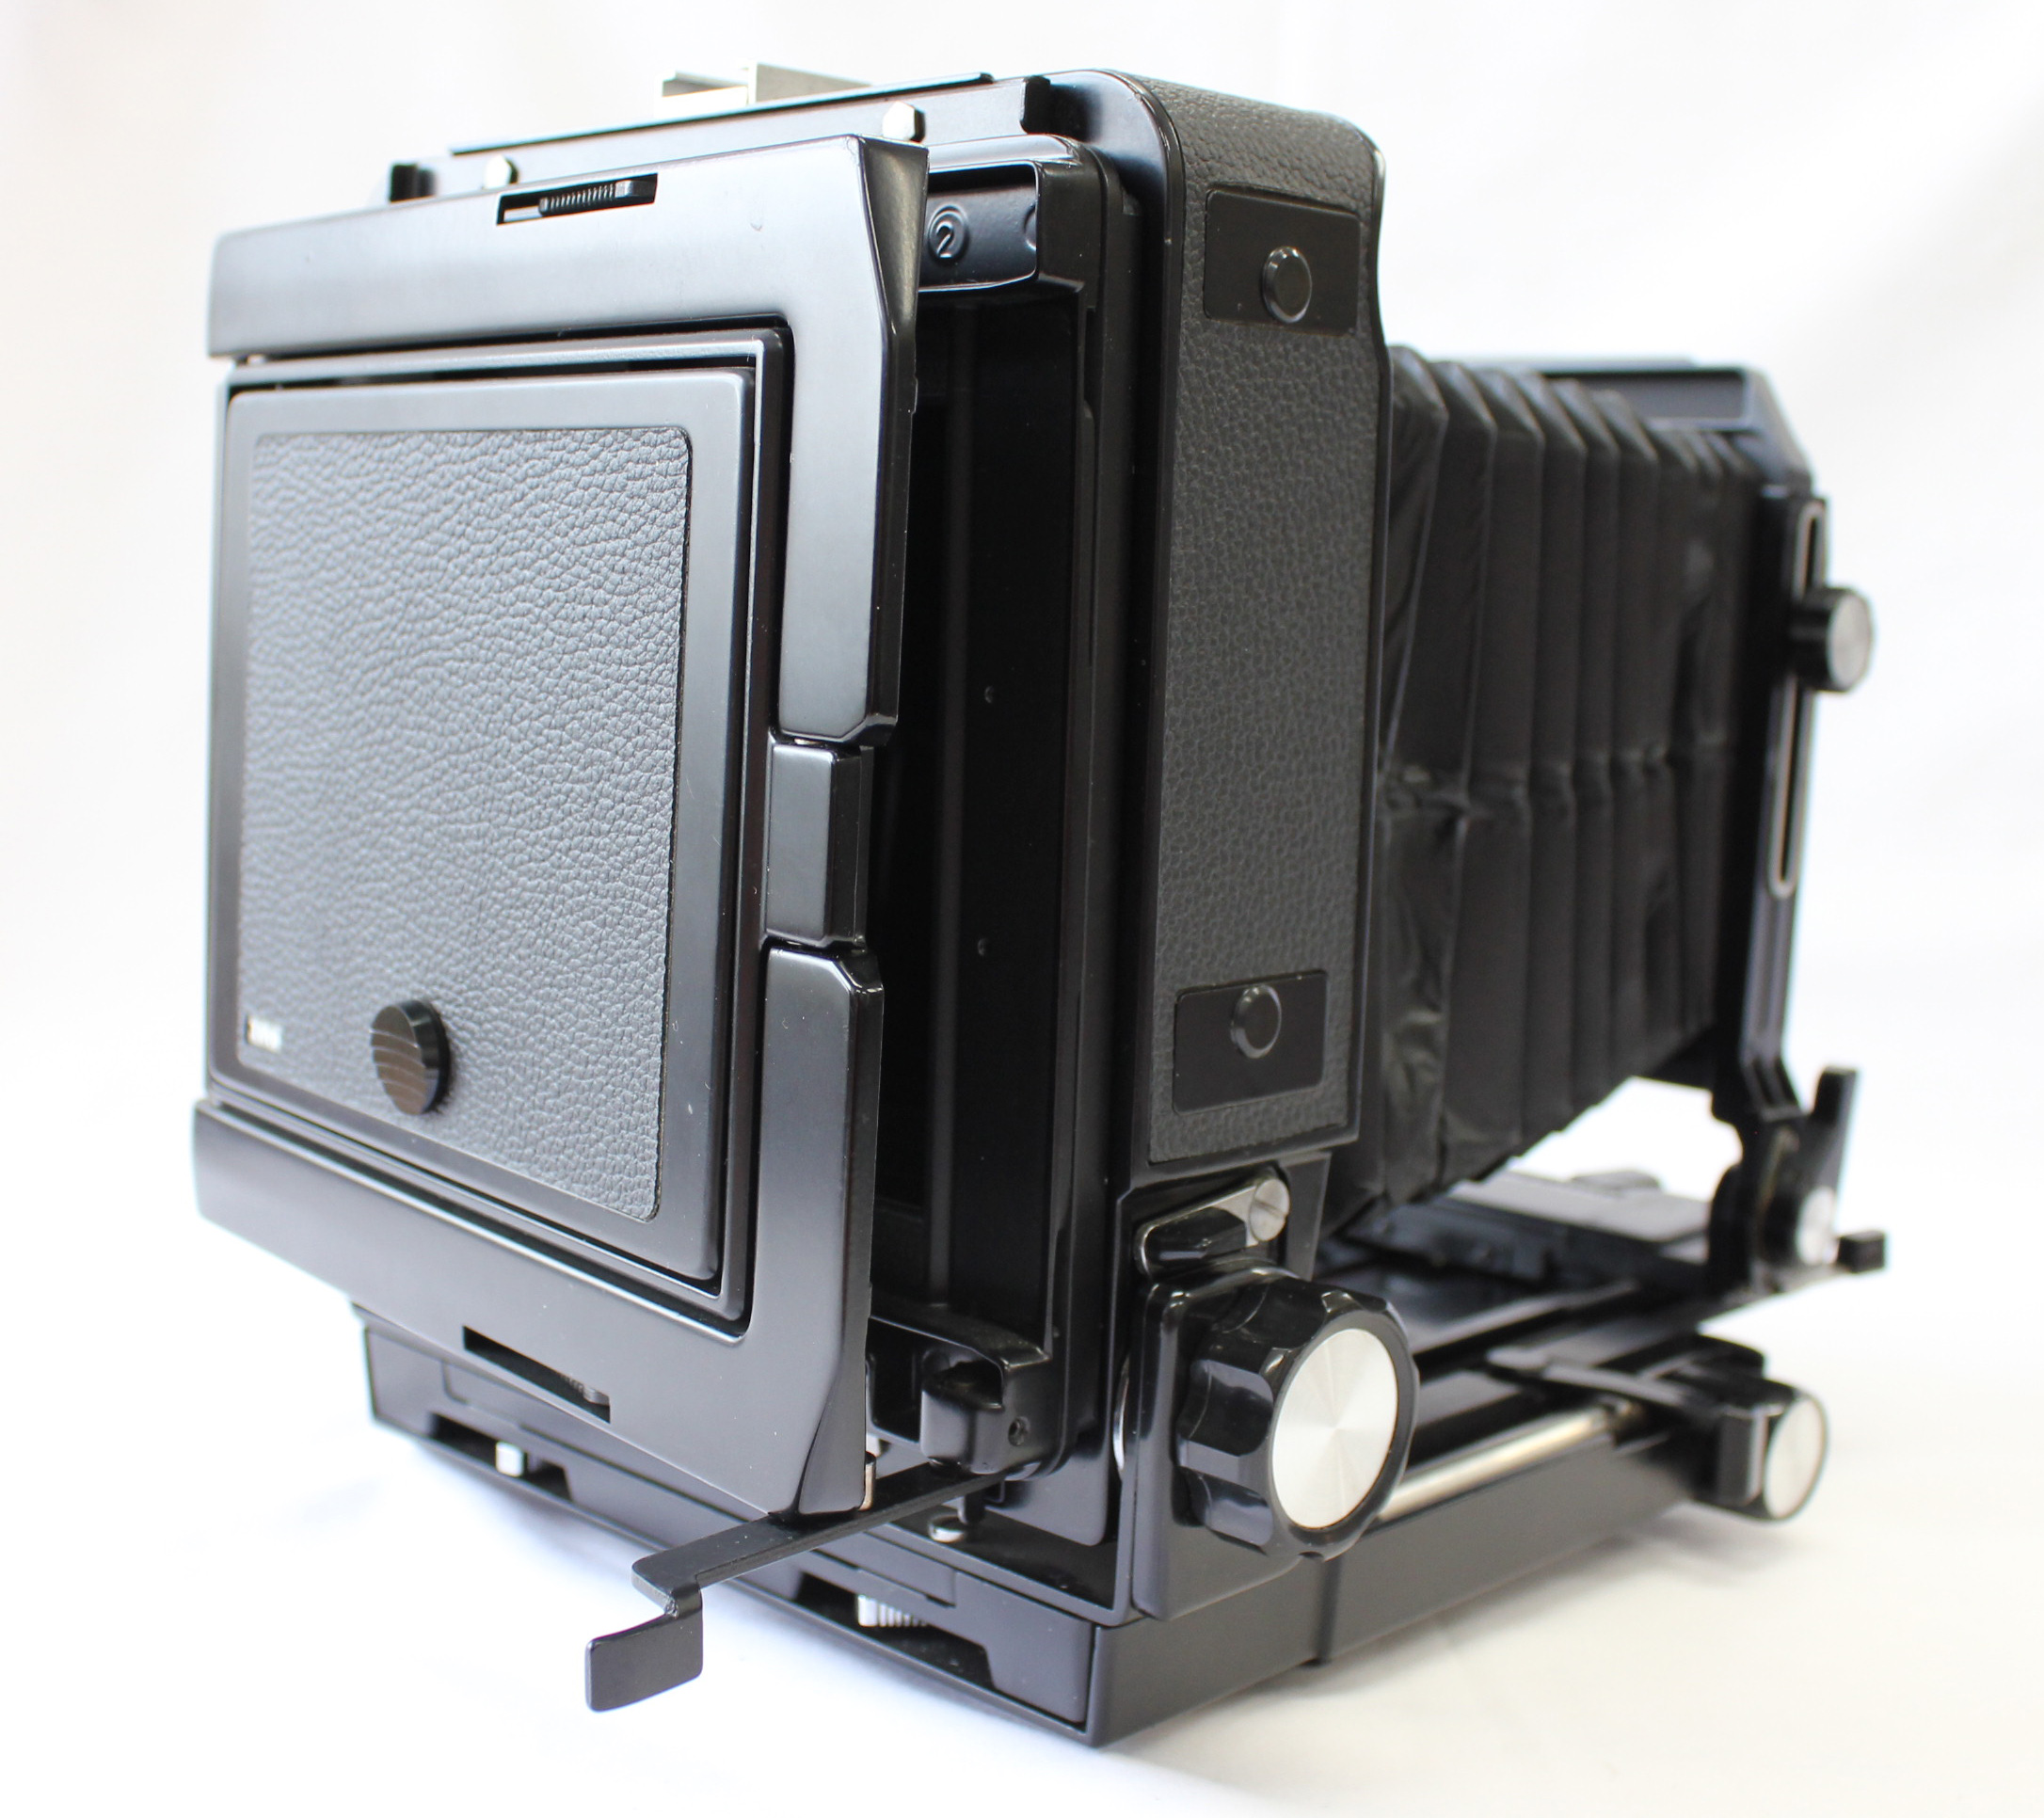  Toyo Field 45A 4x5 Large Format Film Camera with Revolving Back and 3 Cut Film Holders from Japan Photo 11